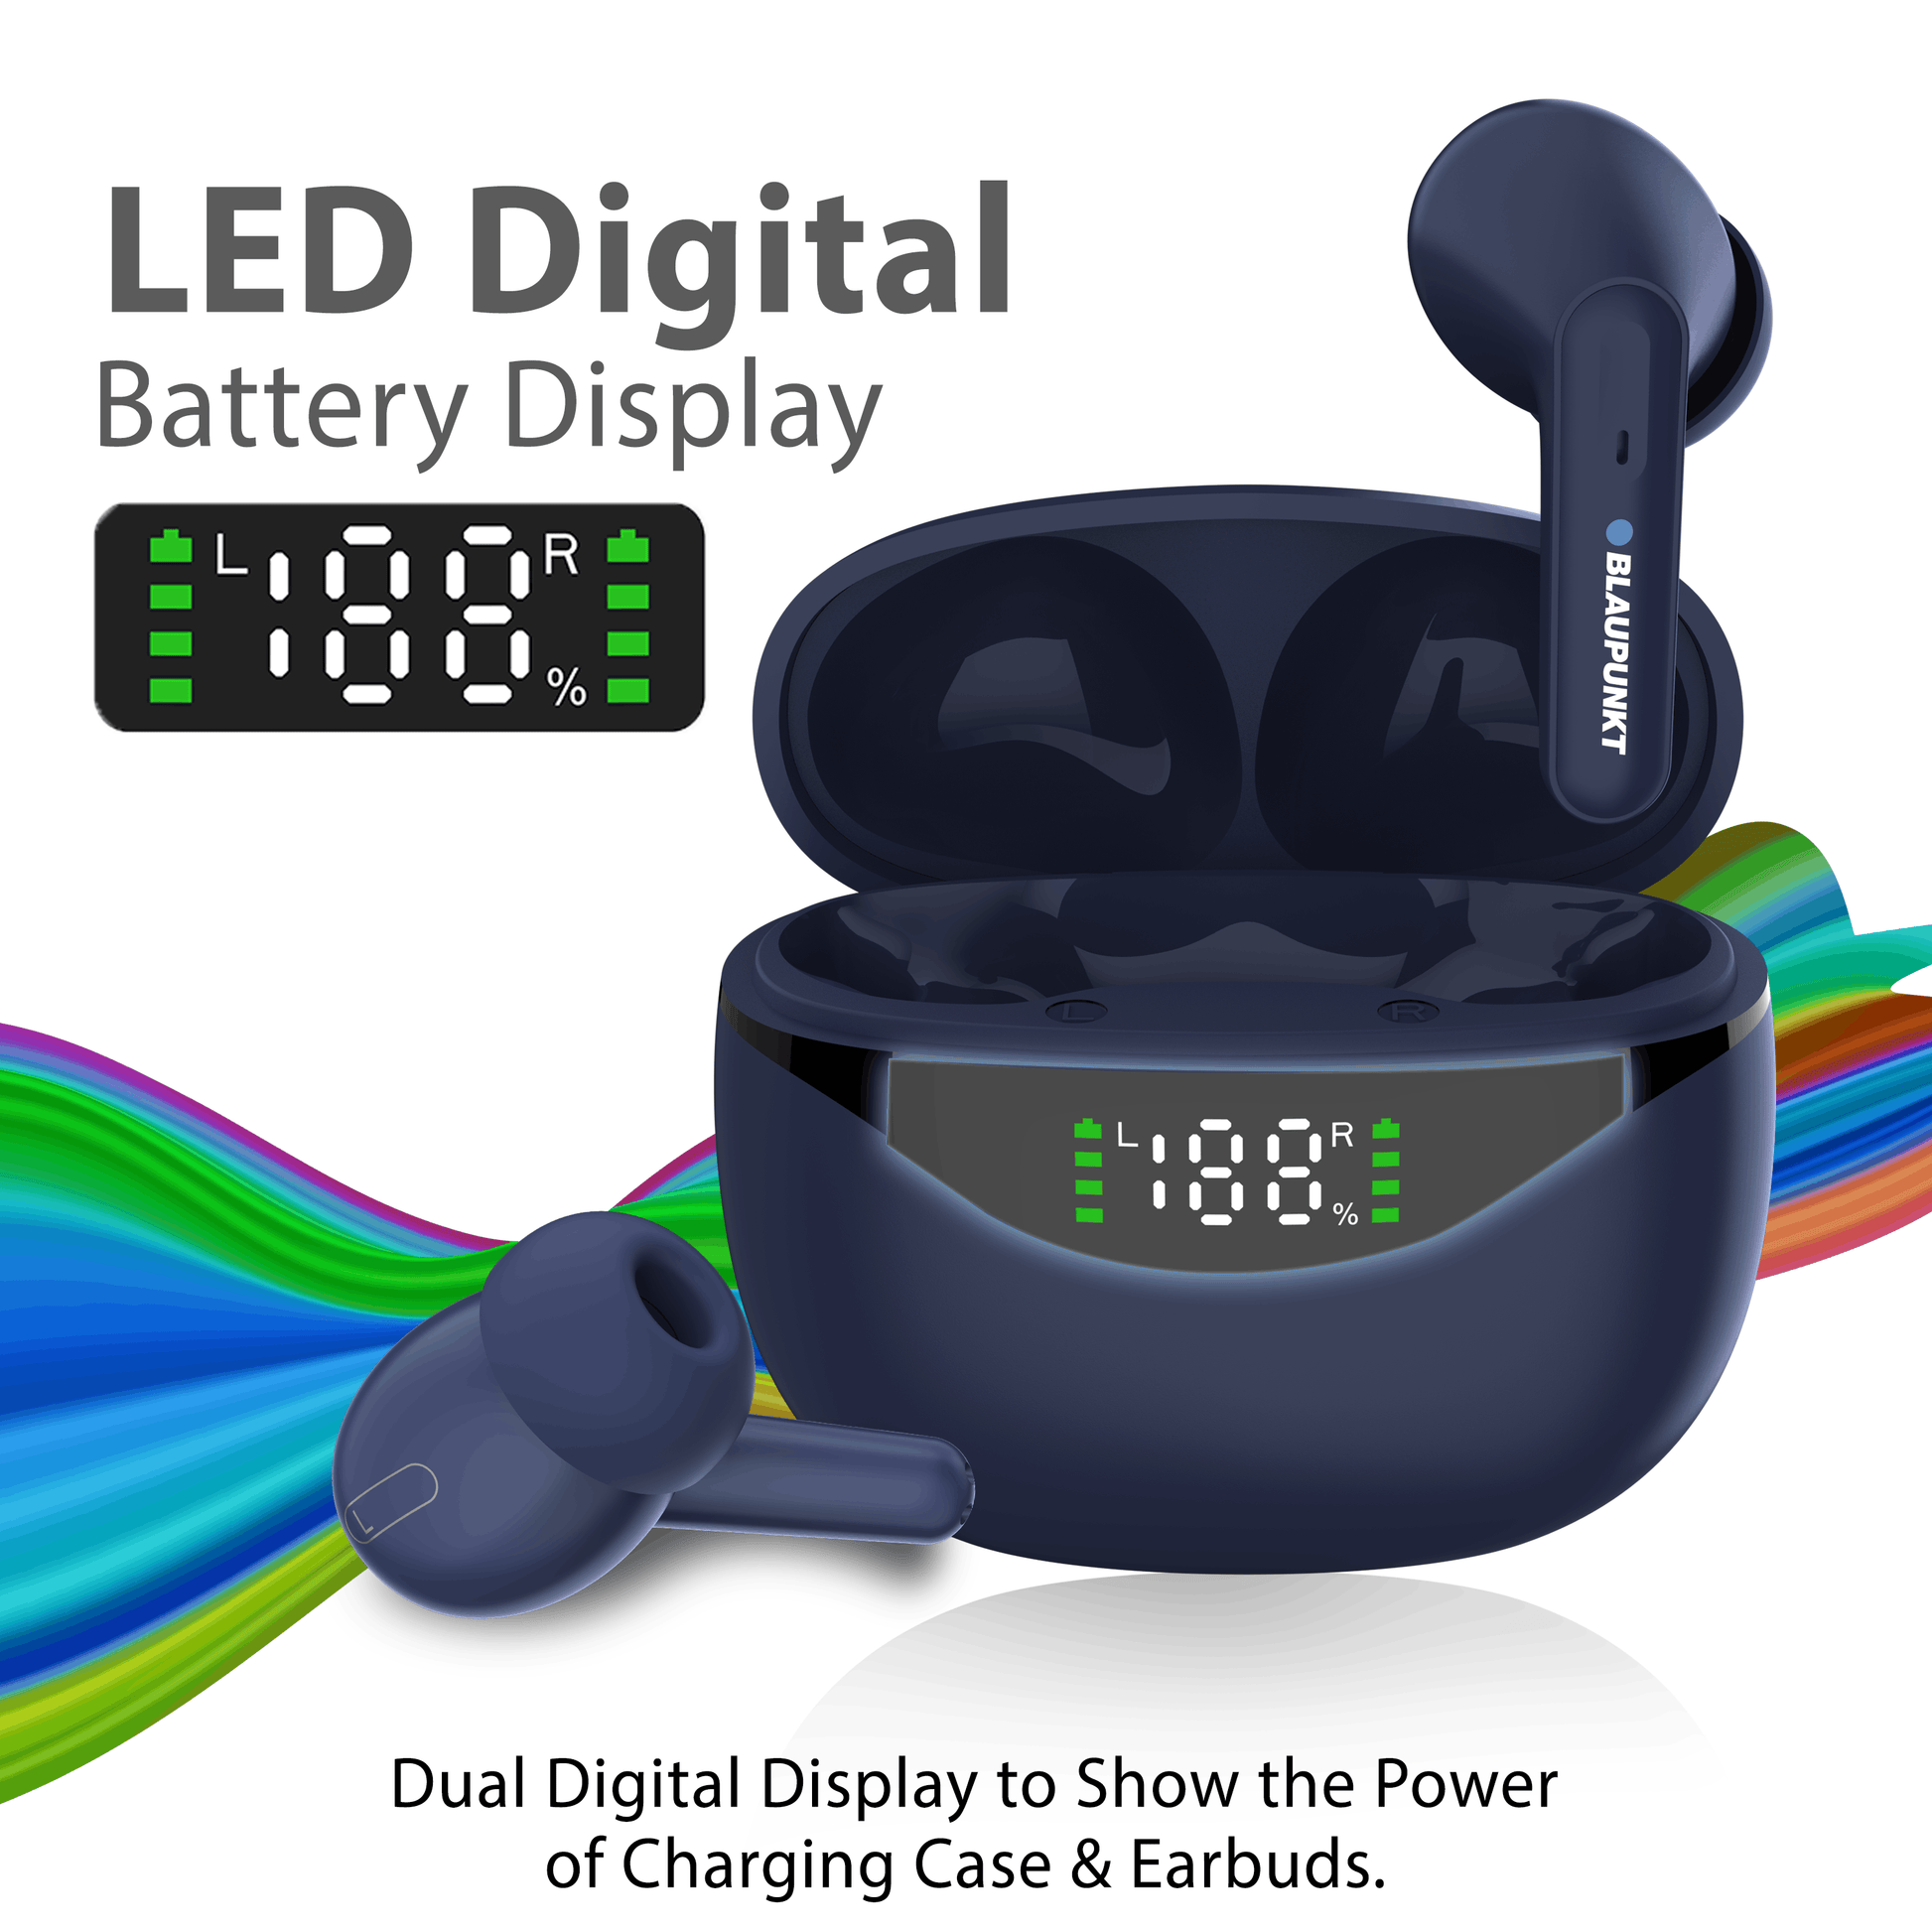 Bluetooth Earbuds with LED Digital Battery Display